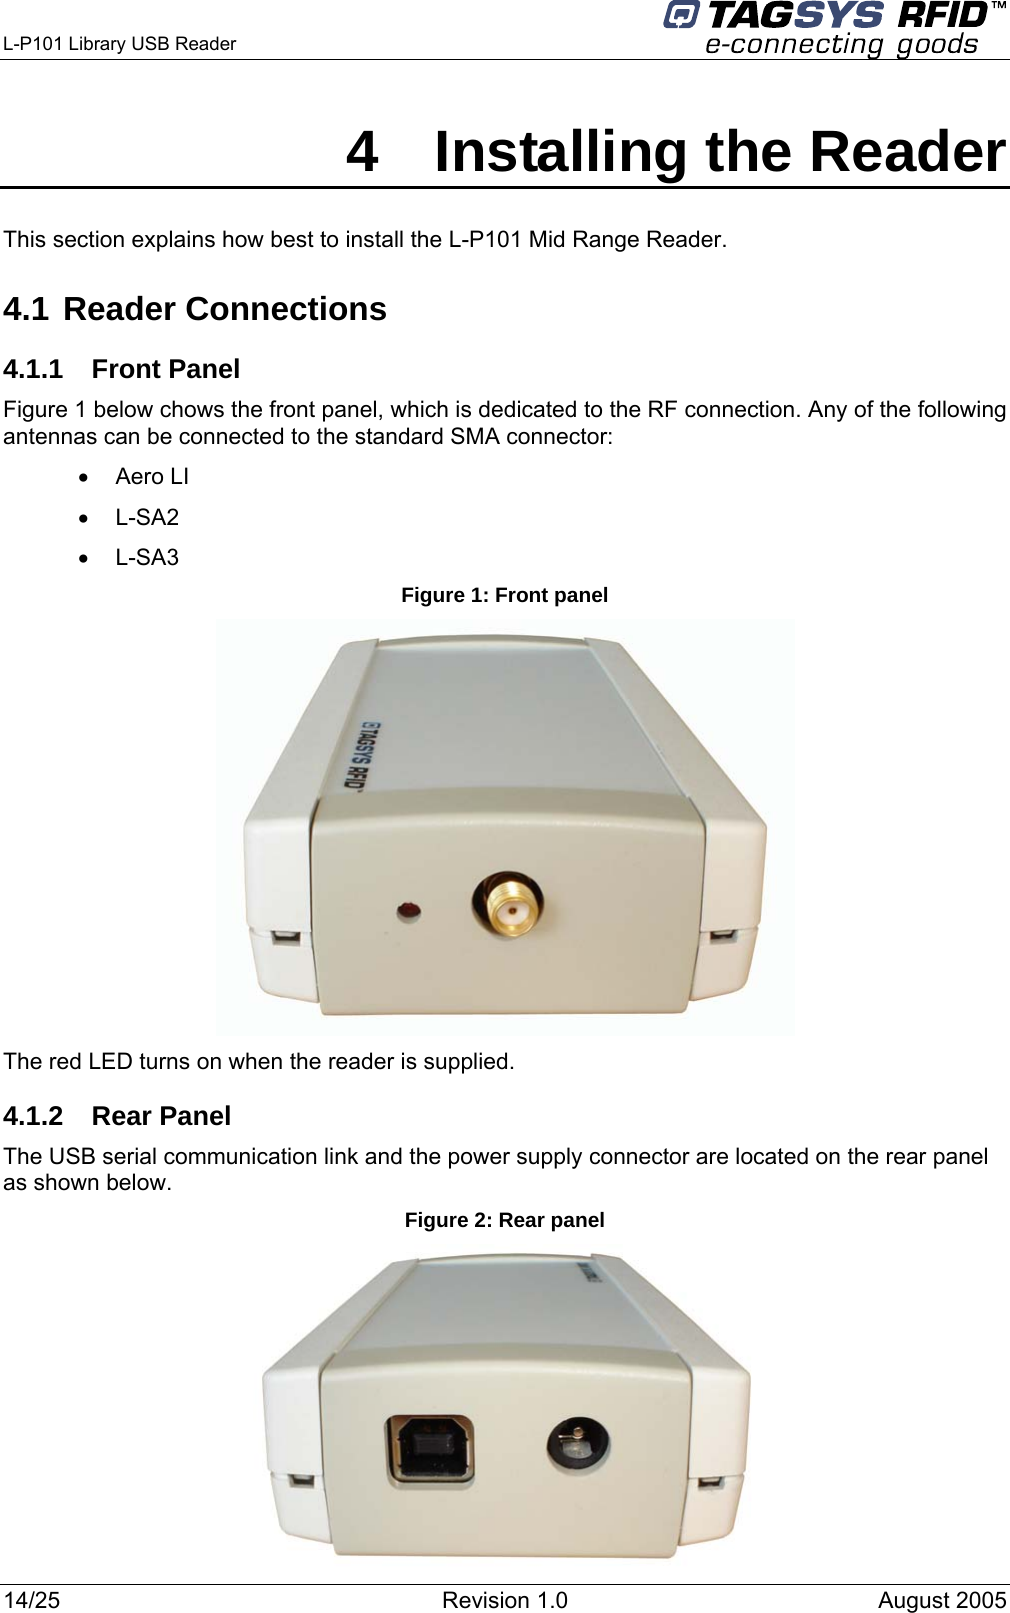  L-P101 Library USB Reader      4  Installing the Reader This section explains how best to install the L-P101 Mid Range Reader. 4.1 Reader Connections 4.1.1 Front Panel Figure 1 below chows the front panel, which is dedicated to the RF connection. Any of the following antennas can be connected to the standard SMA connector: •  Aero LI •  L-SA2 •  L-SA3 Figure 1: Front panel  The red LED turns on when the reader is supplied. 4.1.2  Rear Panel  The USB serial communication link and the power supply connector are located on the rear panel as shown below.  Figure 2: Rear panel 14/25  Revision 1.0  August 2005    